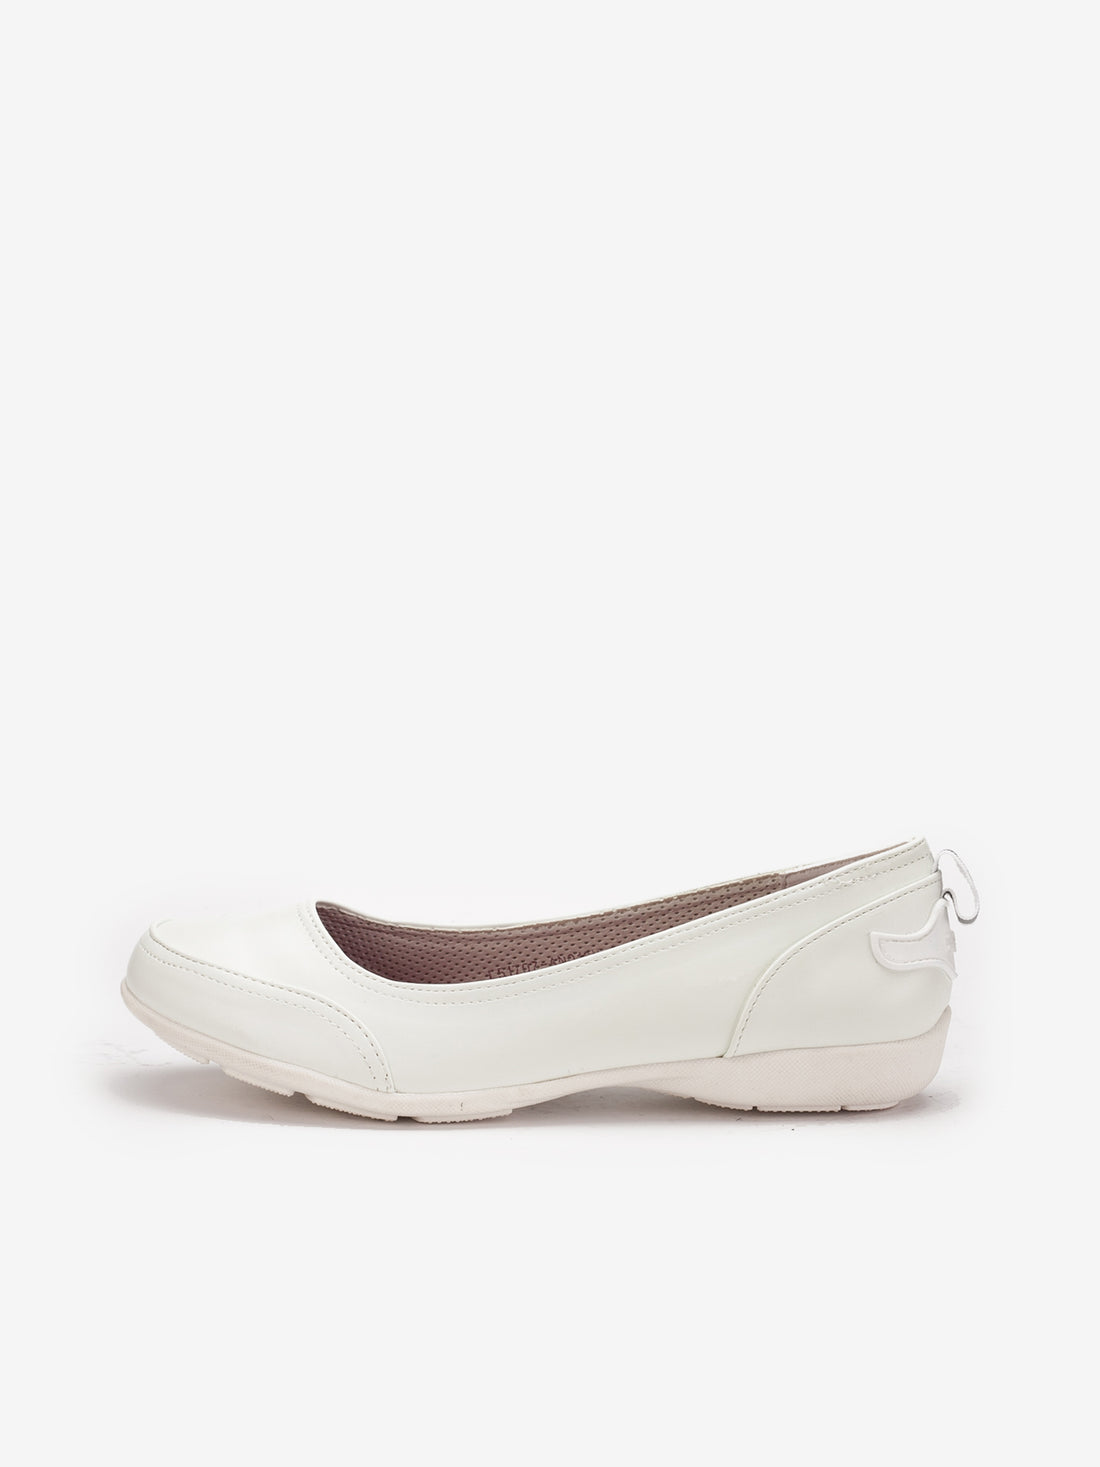 Larrie White Matching Casual Basic Flats